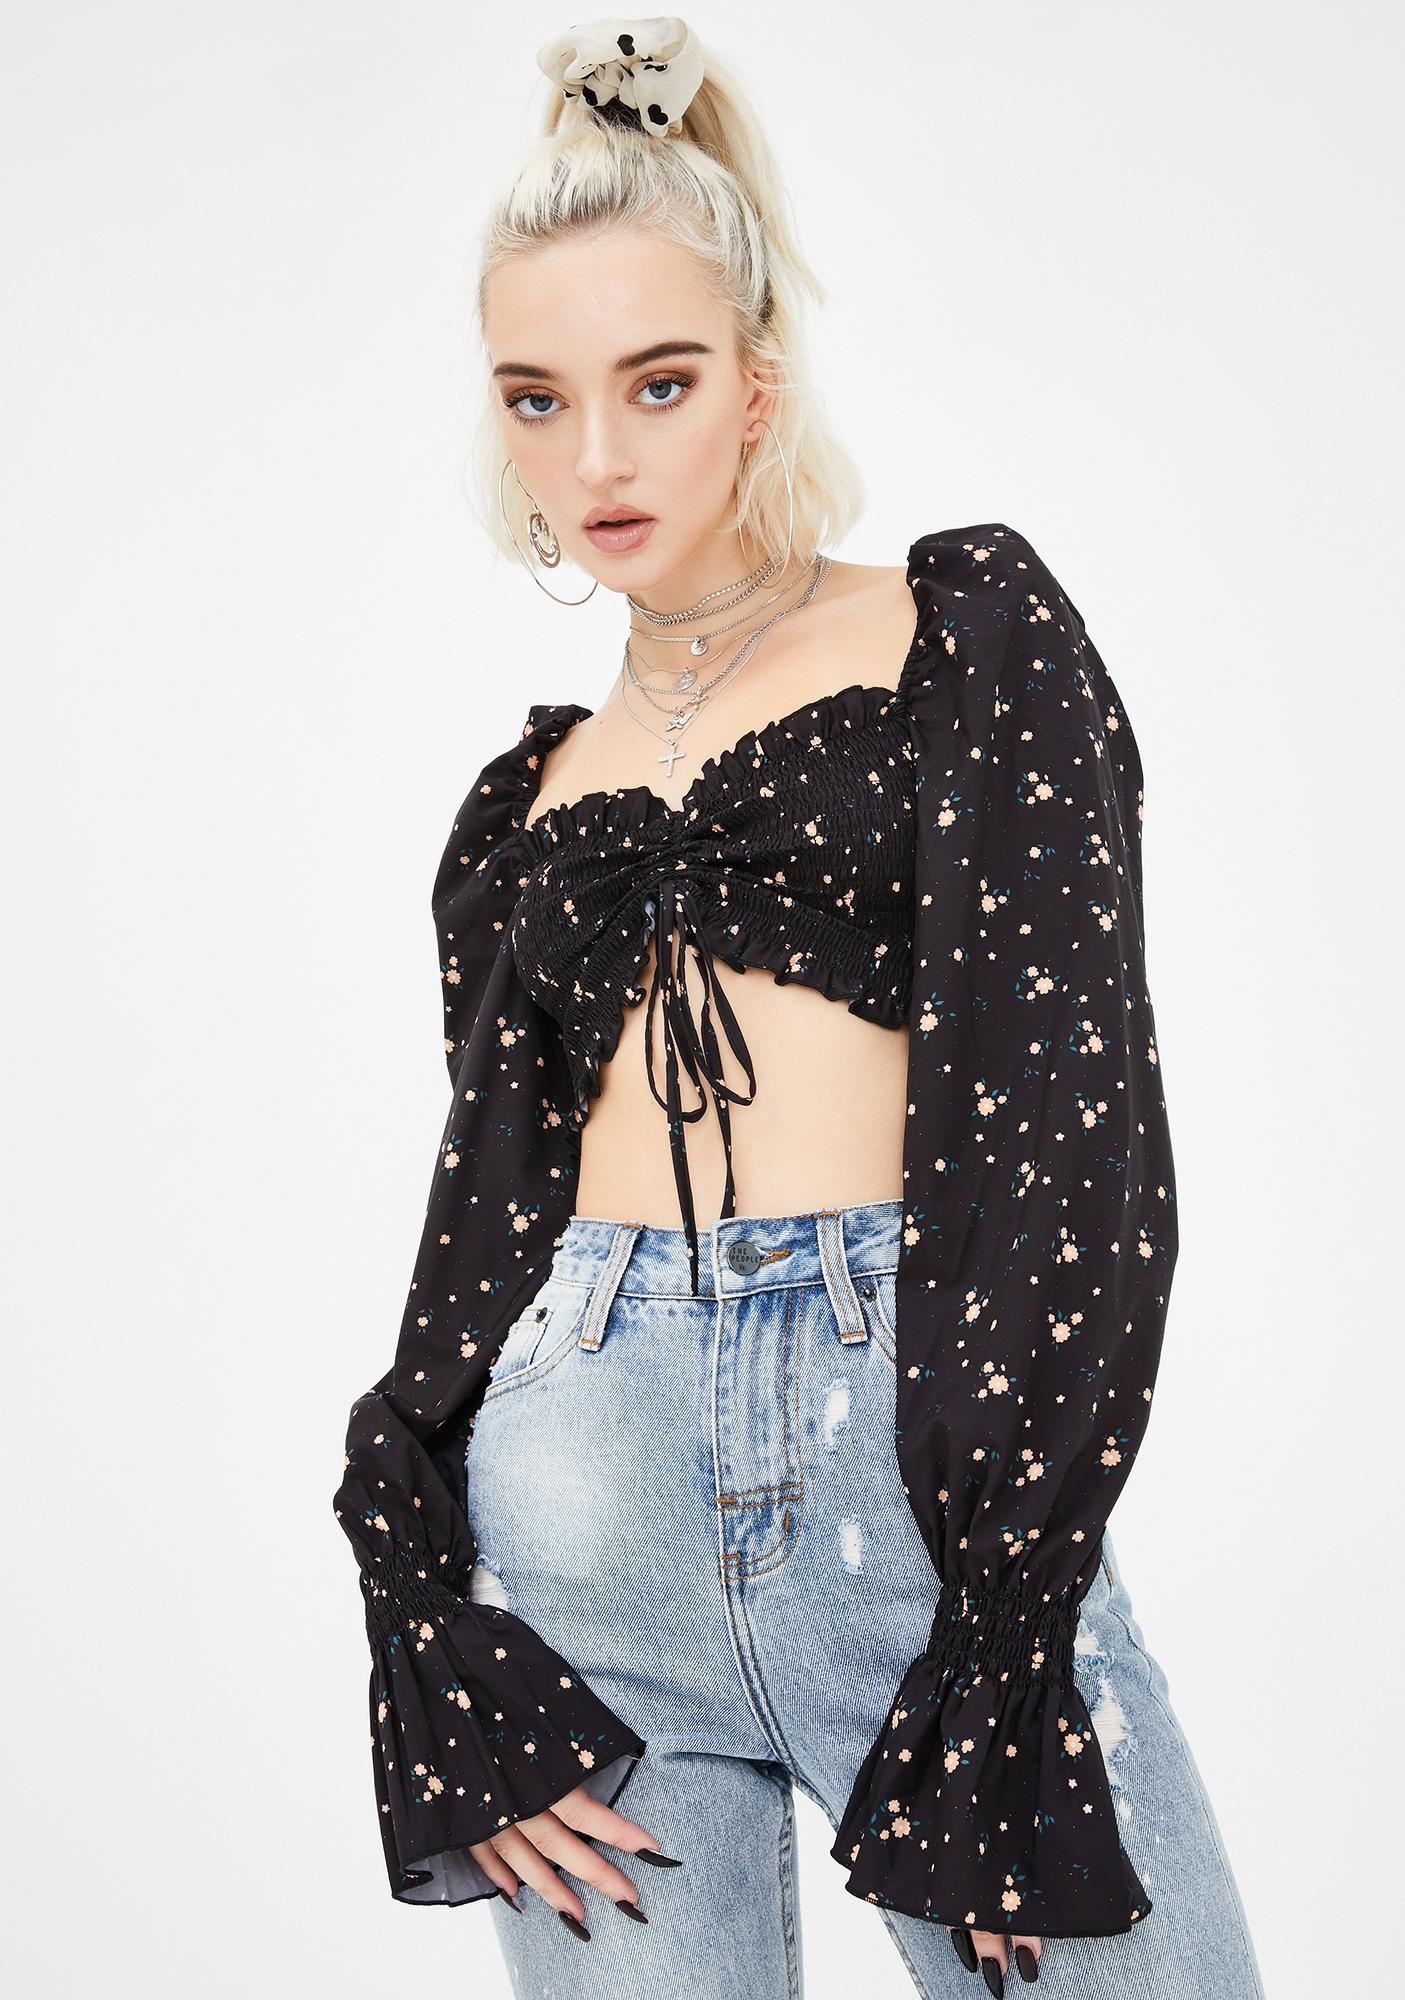 6 Crop Top Trends to Try This Summer